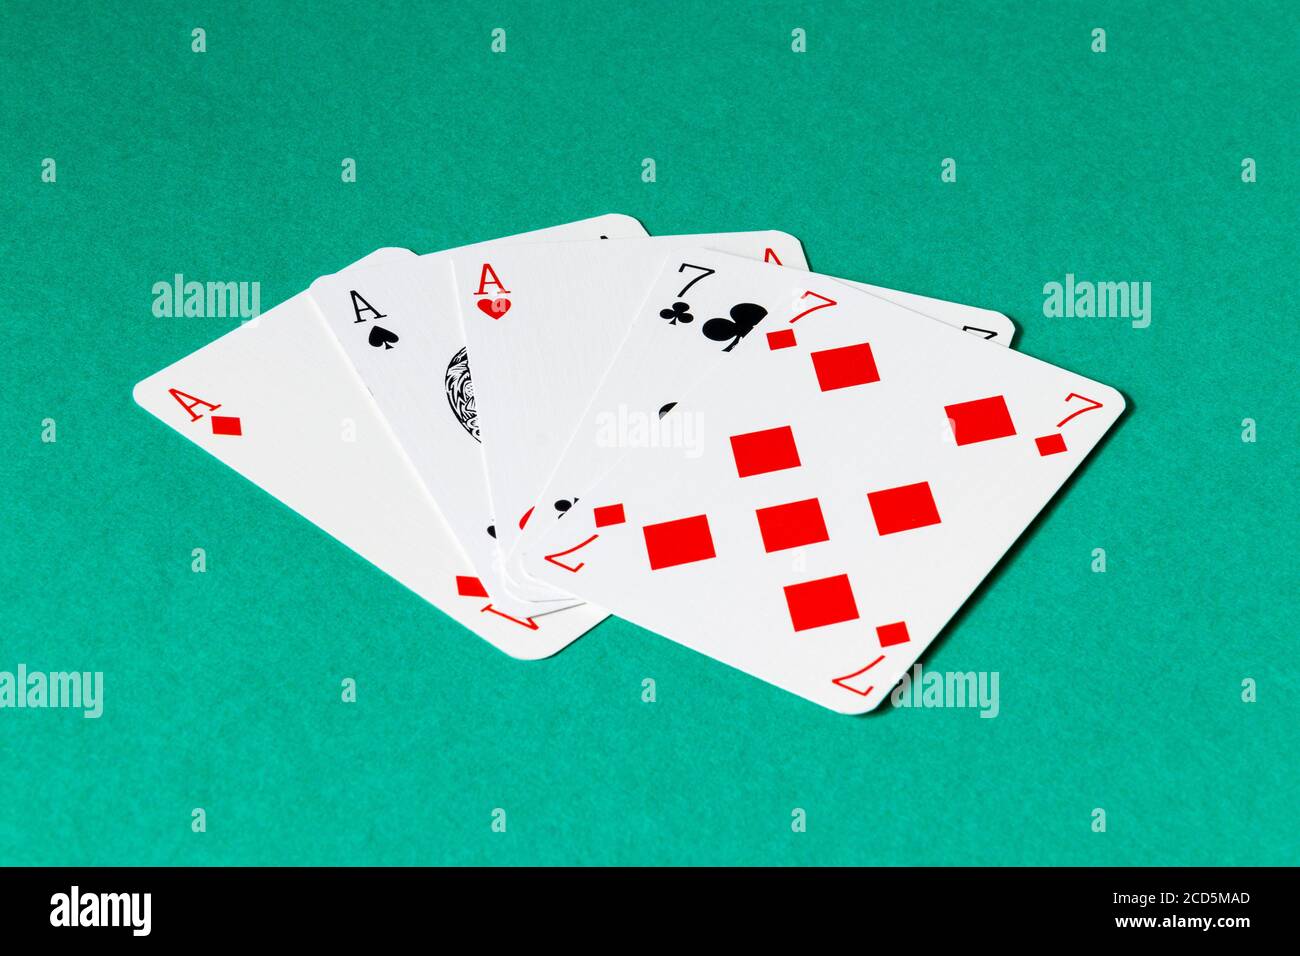 A full house of aces and sevens in a game of poker Stock Photo